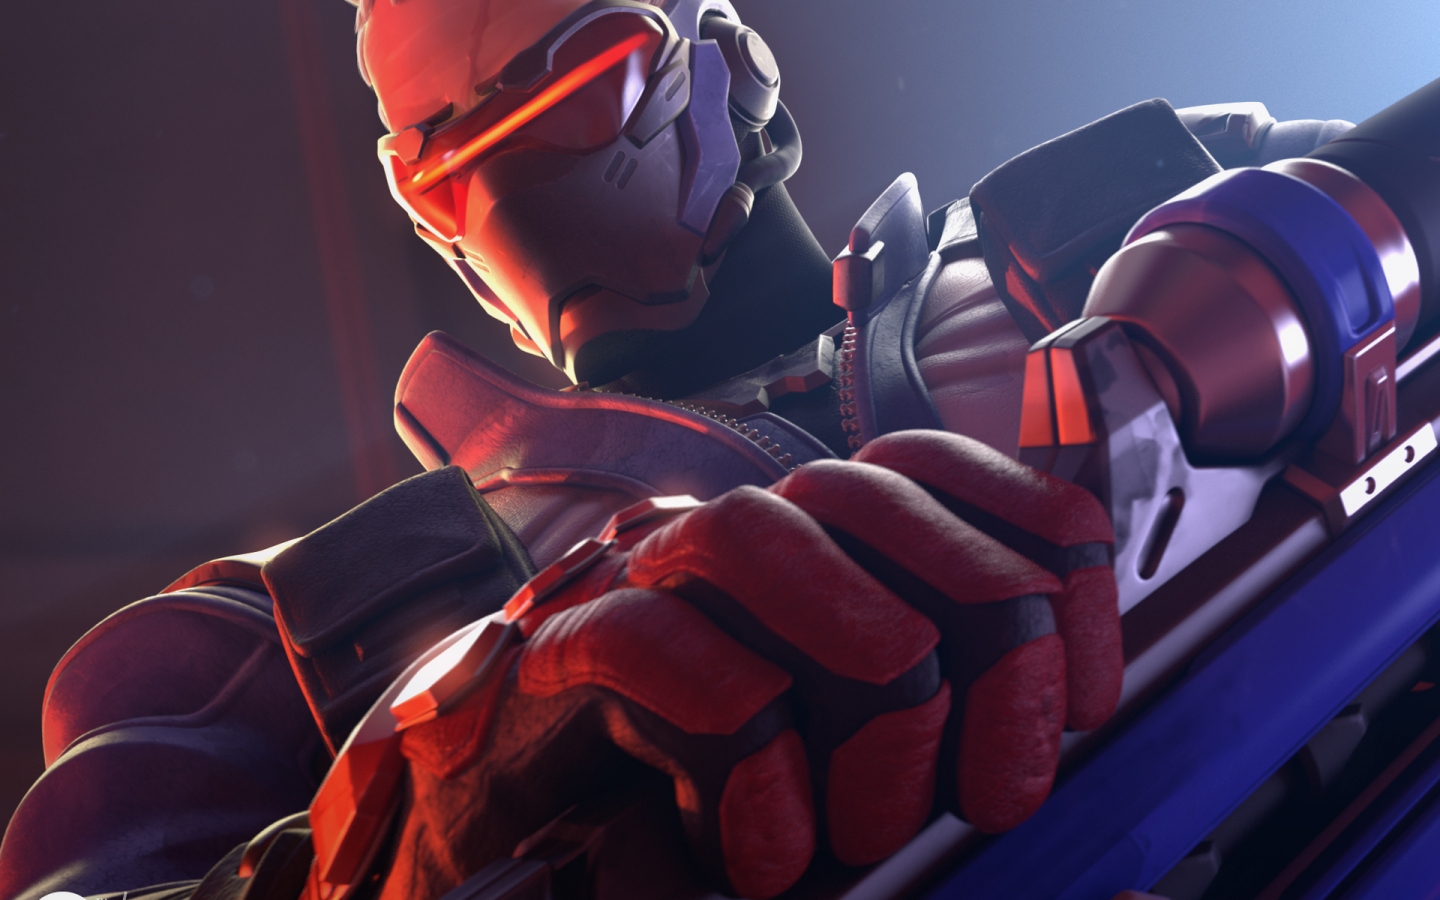 Overwatch Soldier for 1440 x 900 widescreen resolution